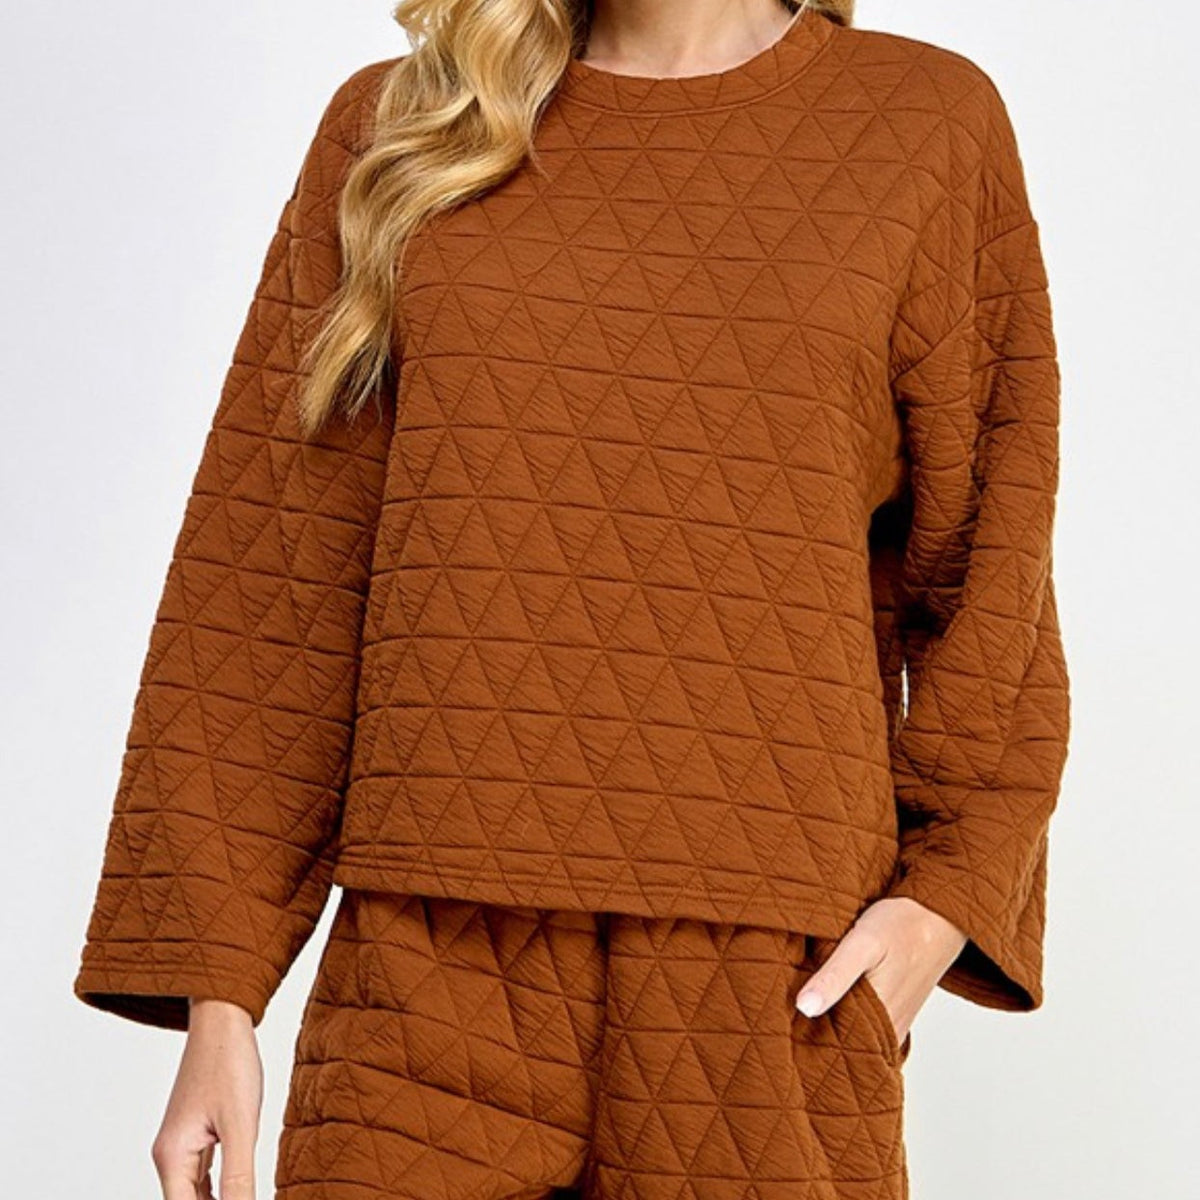 QUILTED LONG SLV TOP